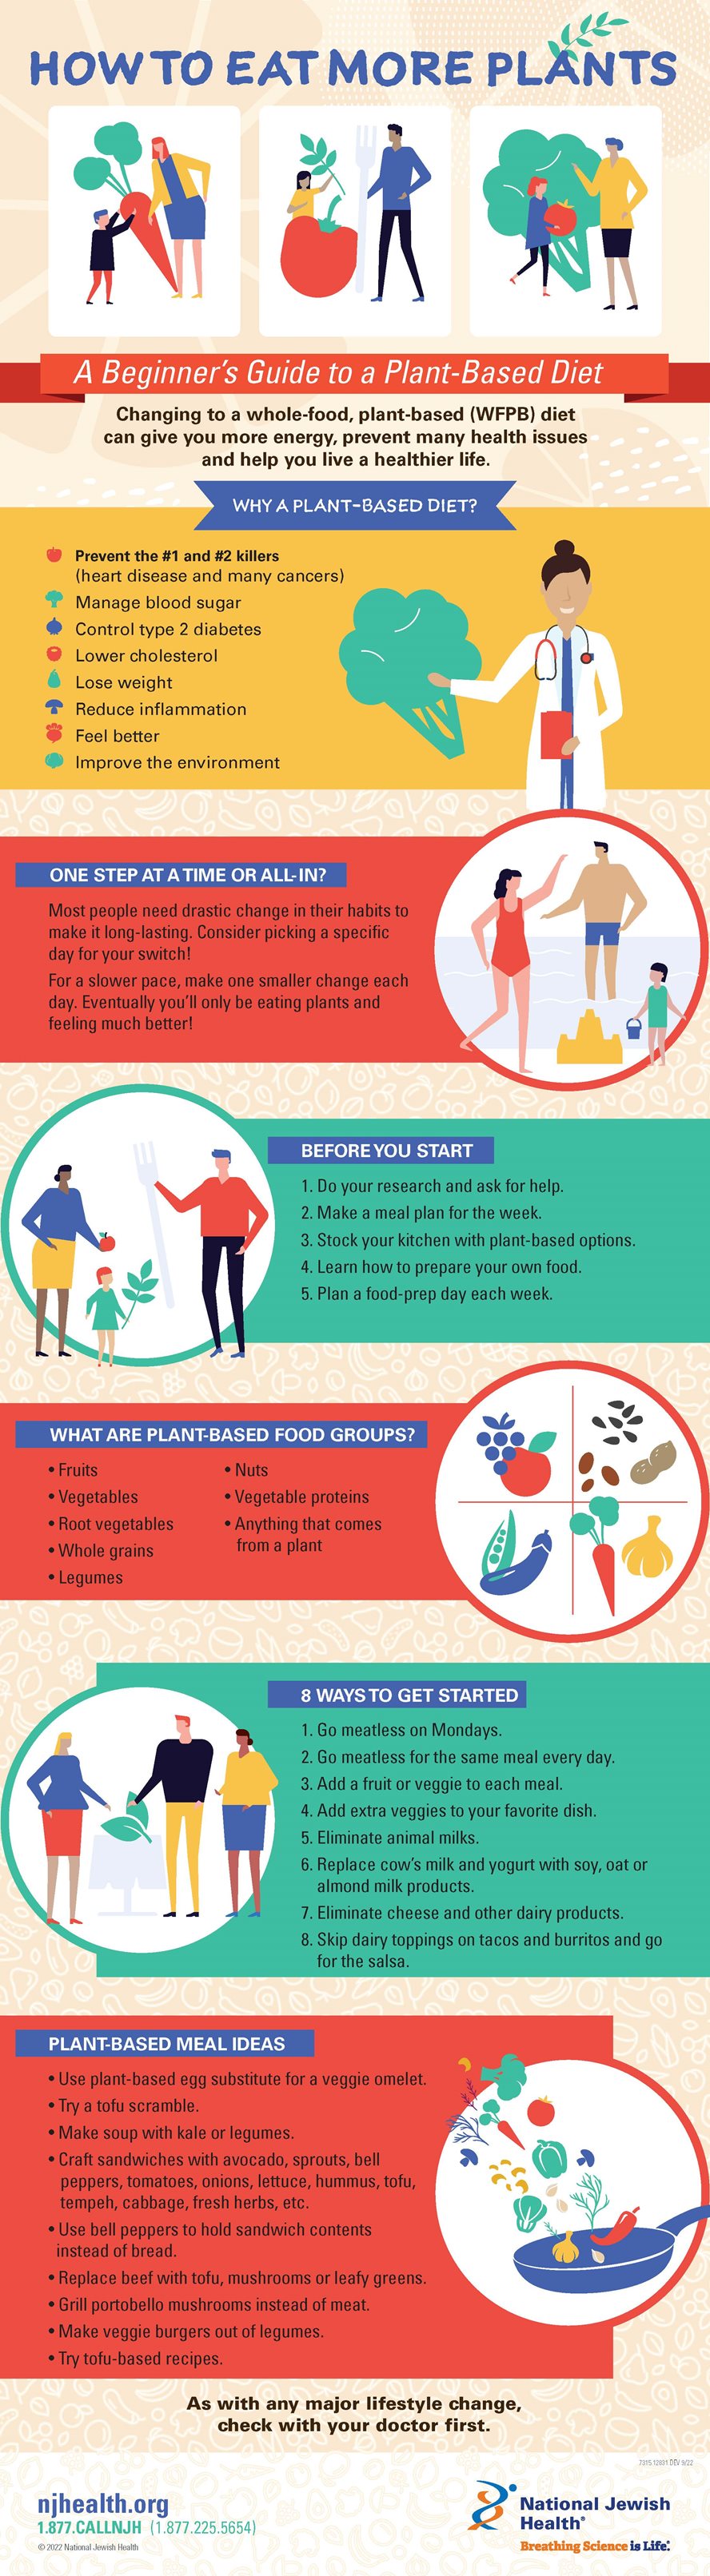 Beginners Guide to Plant Based Eating infographic